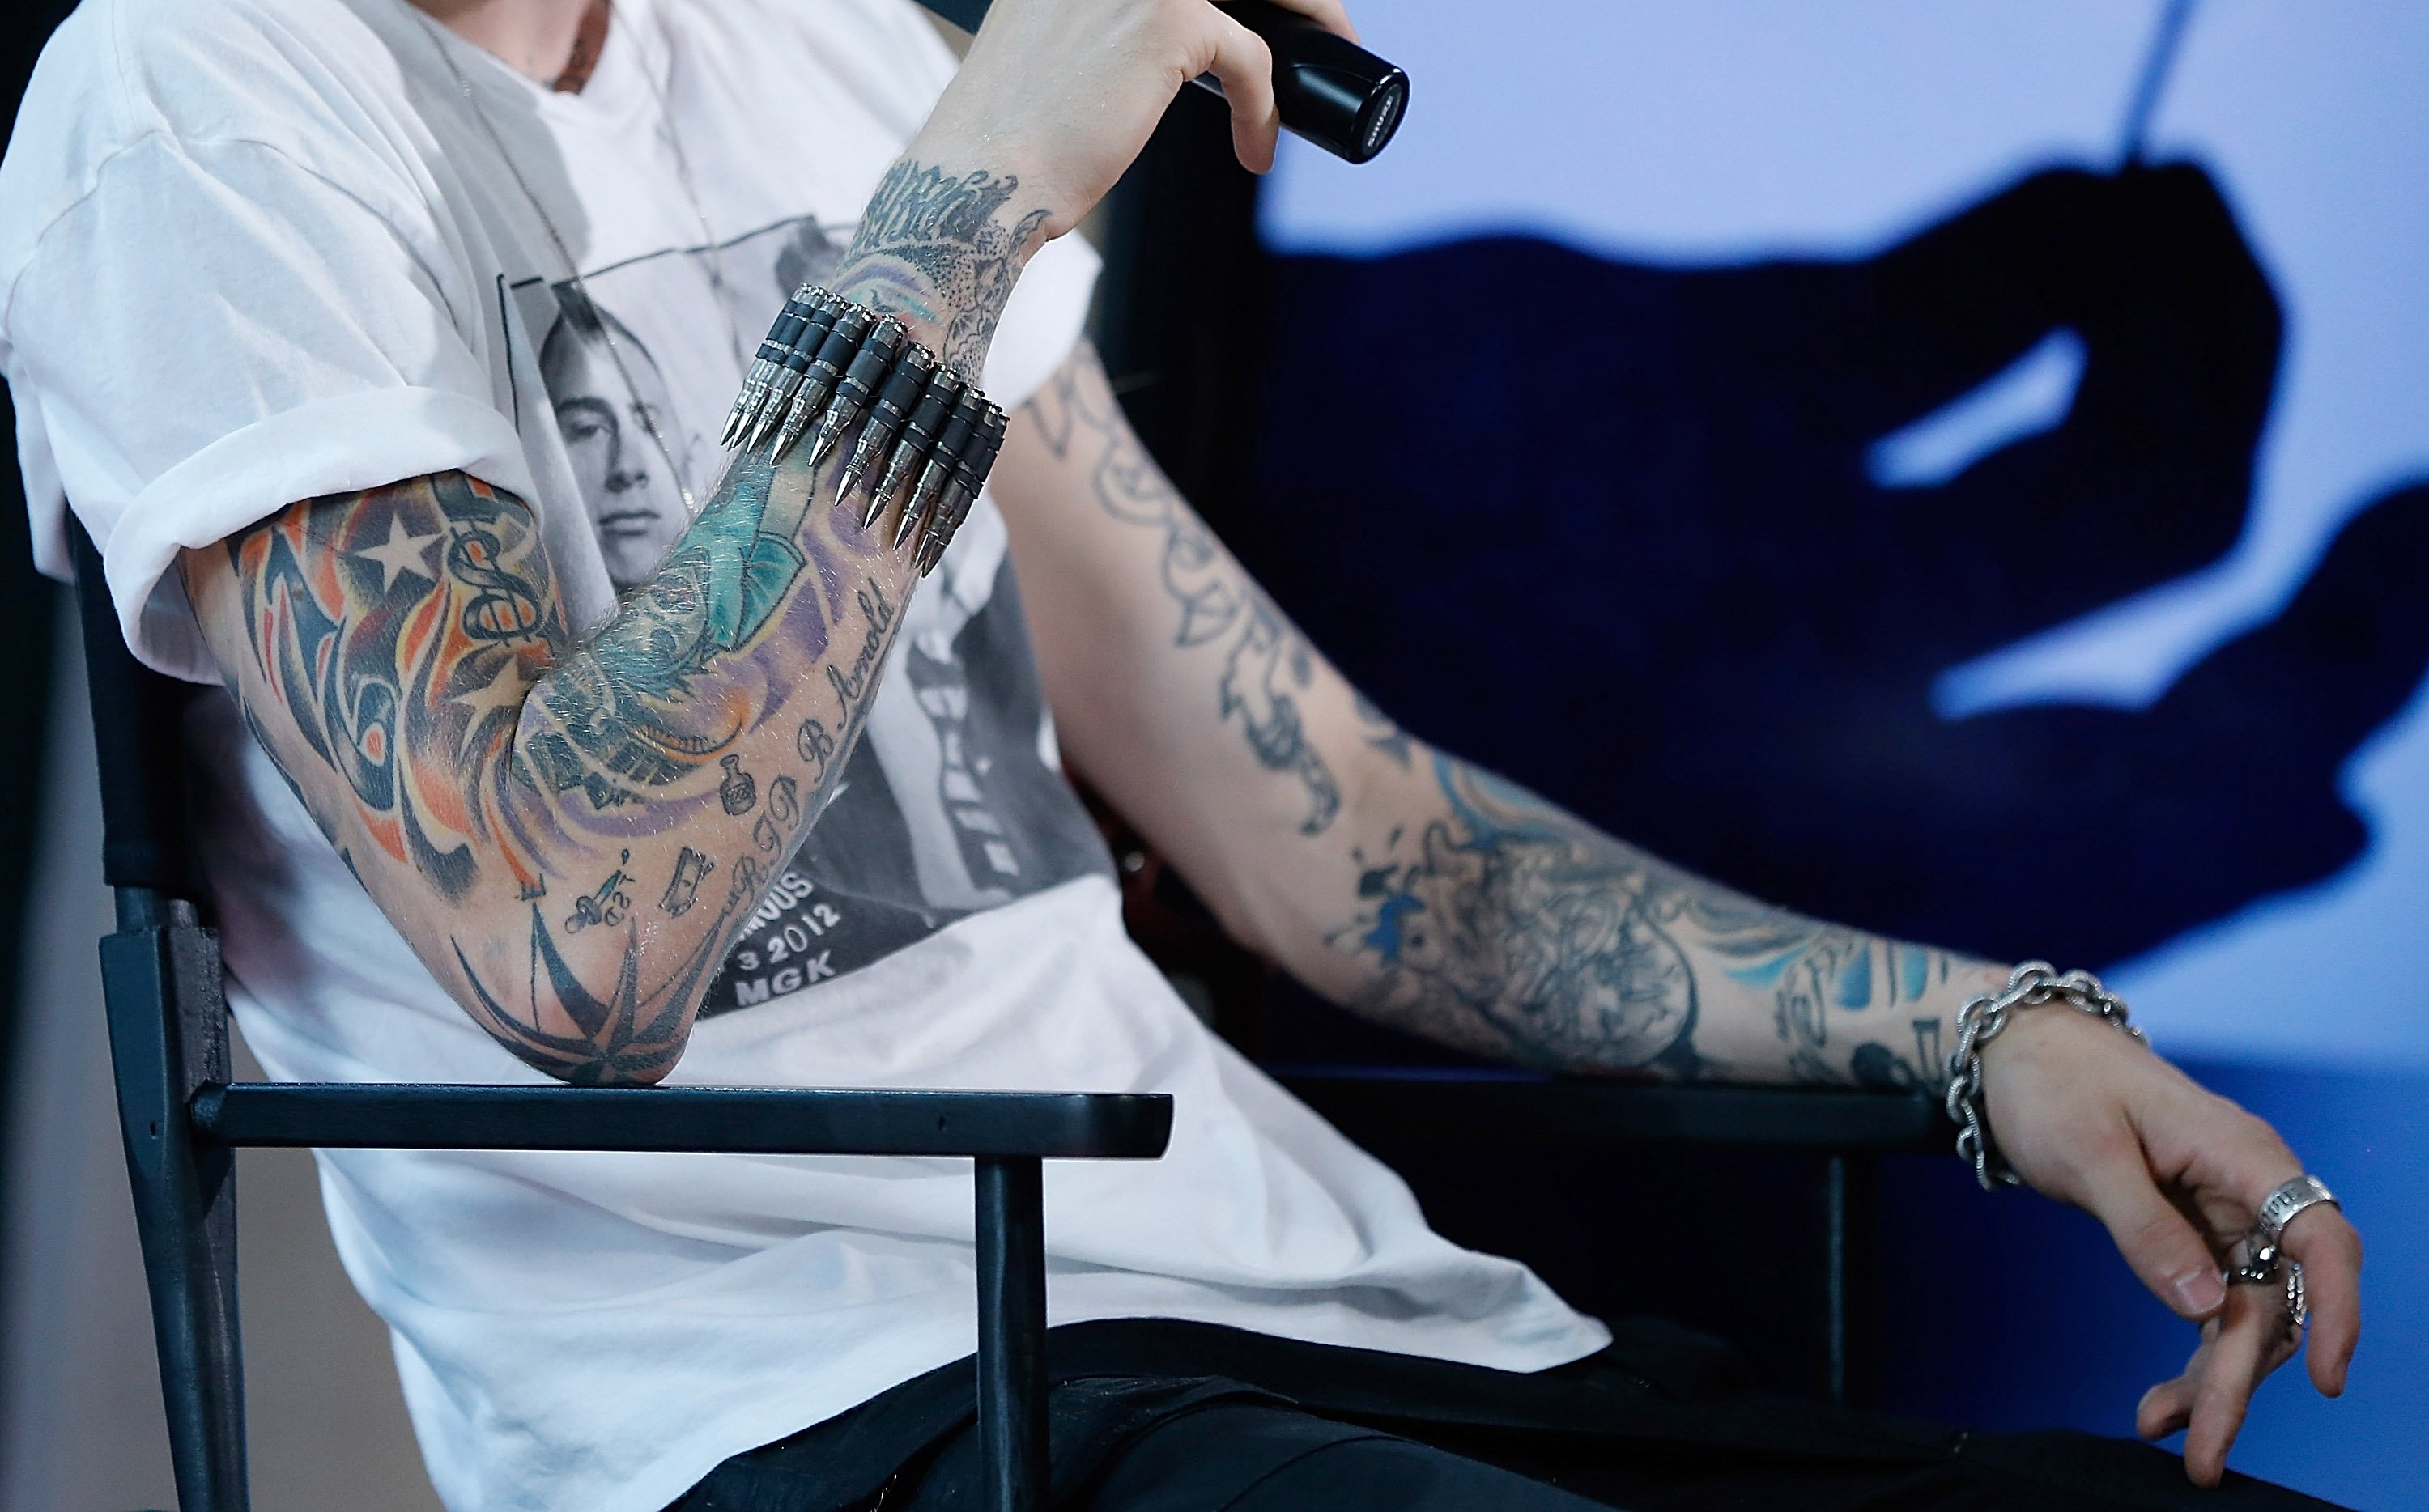 Machine Gun Kelly "RIP B Arnold" tattoo written on his lower right arm. | Source: Getty Images